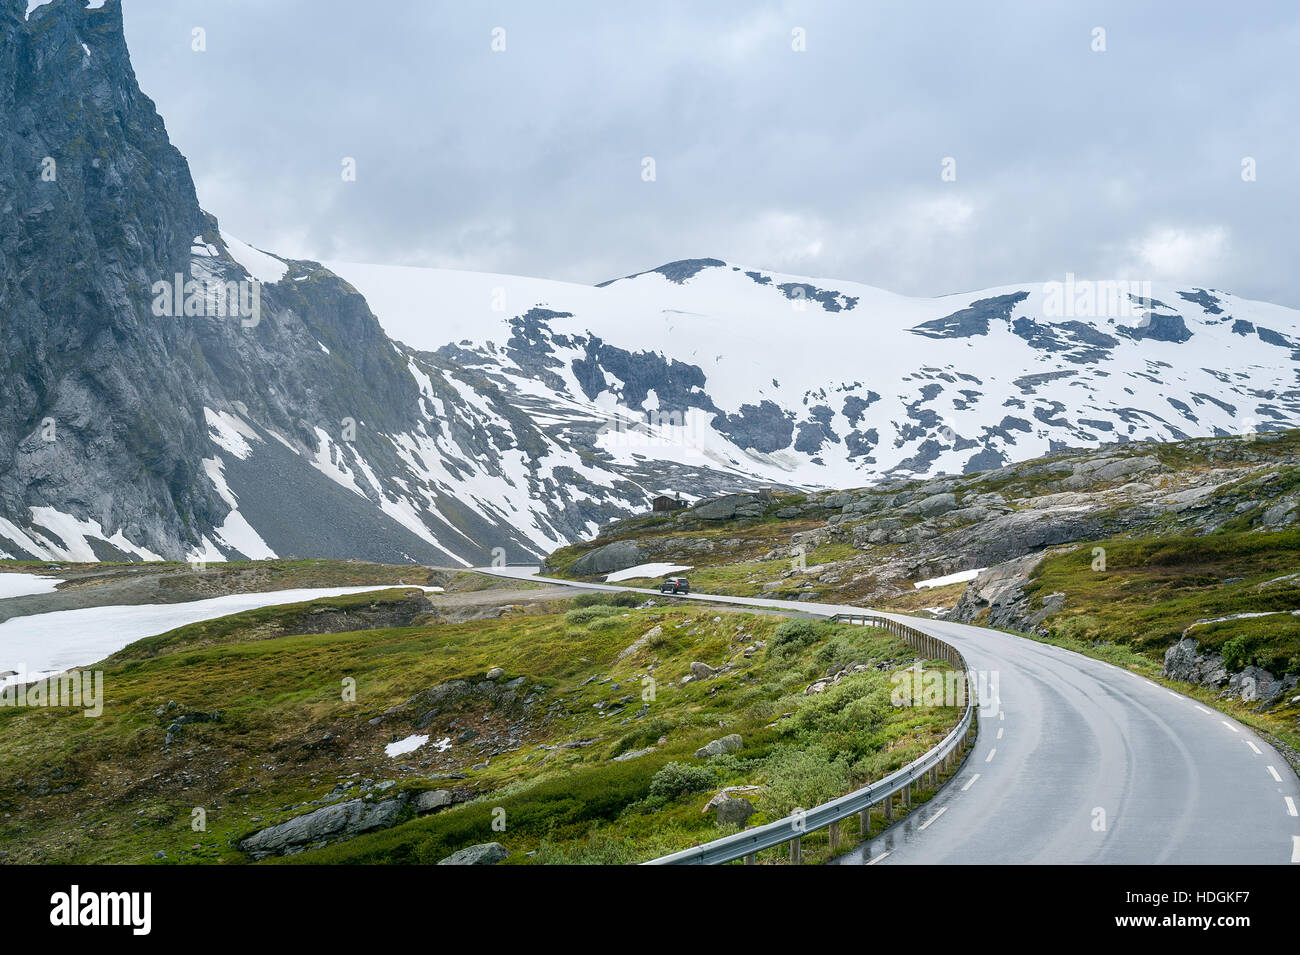 Mountain road at Dalsnibba plateau, Norway Stock Photo